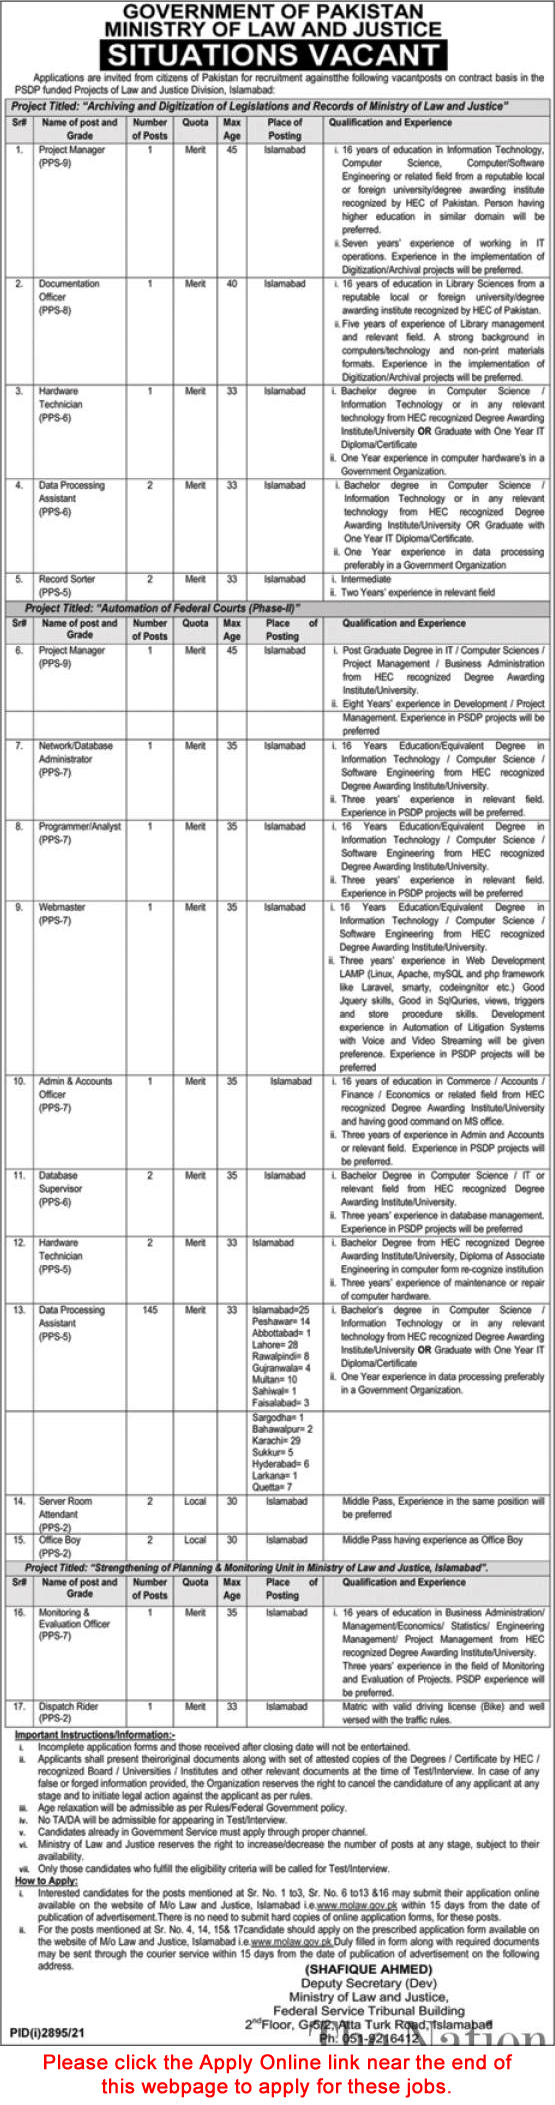 Ministry of Law and Justice Jobs November 2021 Apply Online Data Processing Assistants & Others Latest